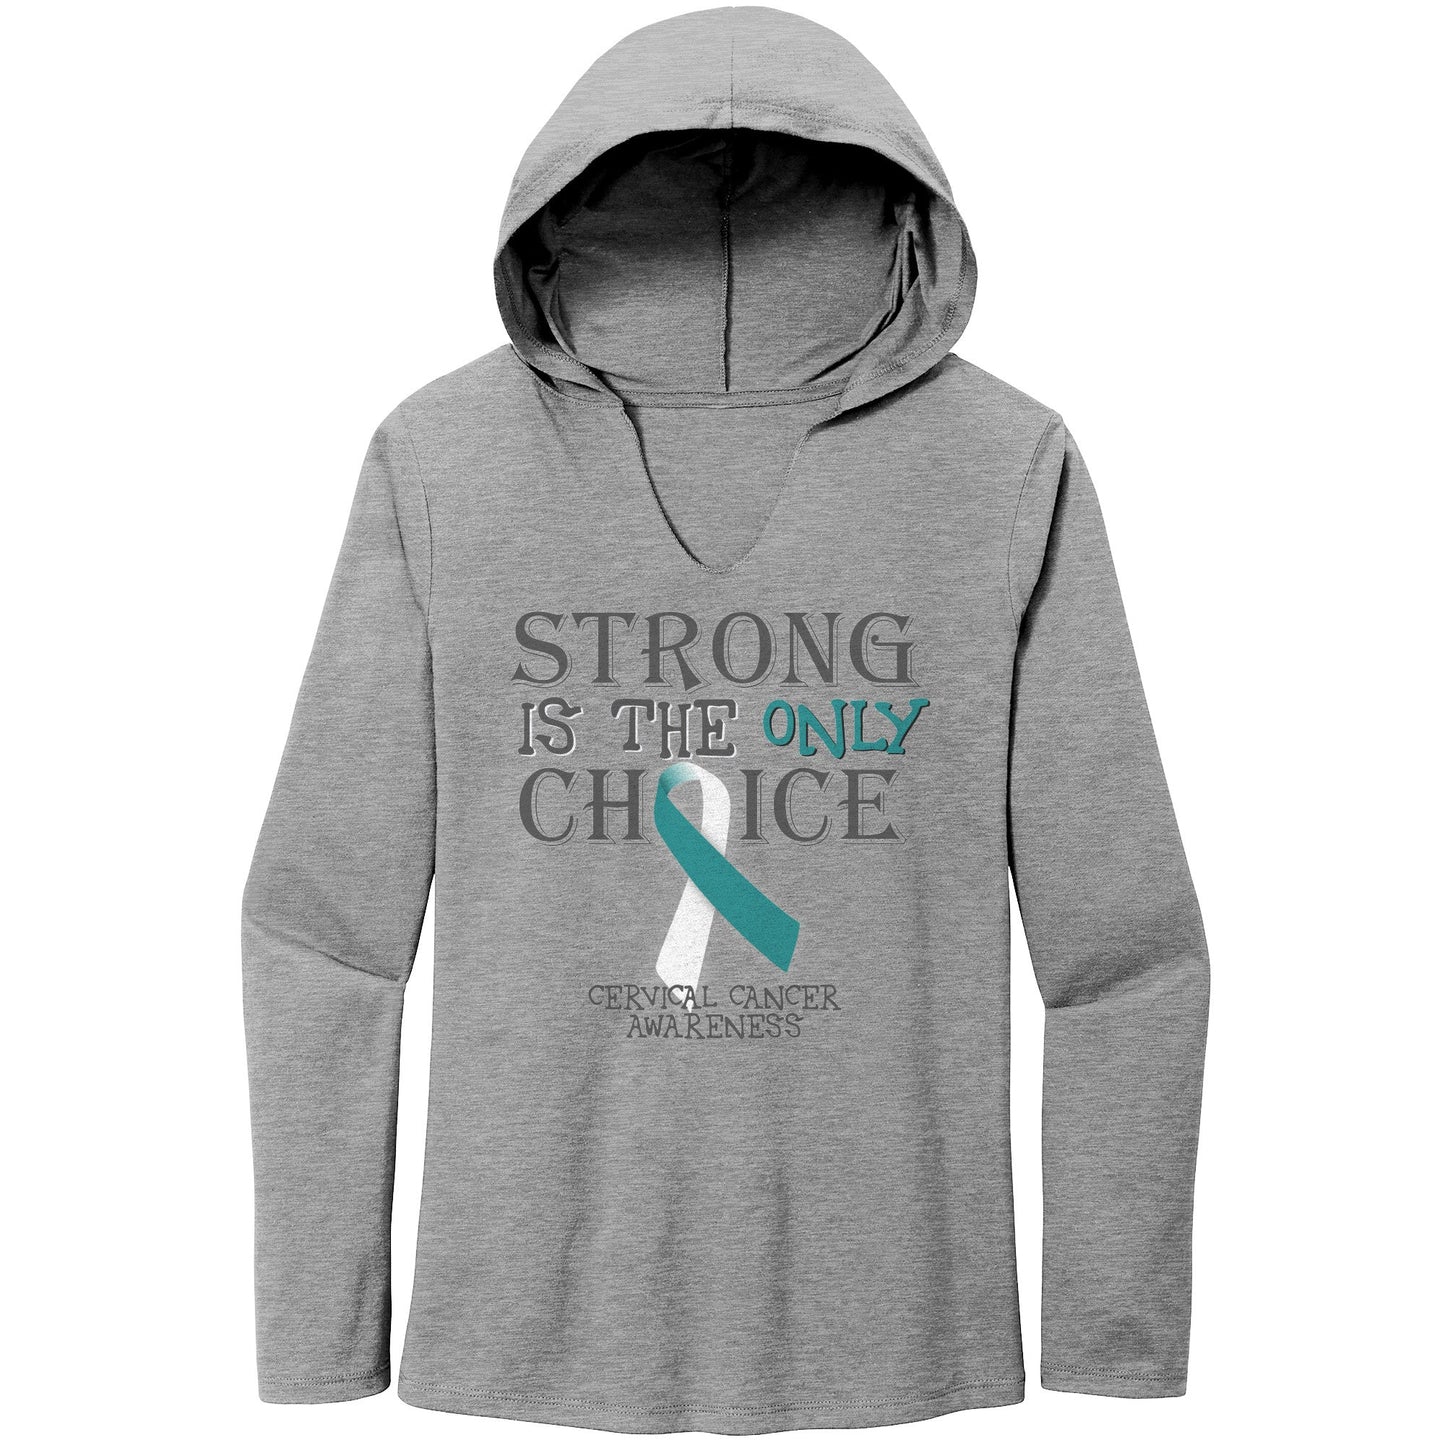 Strong is the Only Choice -Cervical Cancer Awareness T-Shirt, Hoodie, Tank |x|